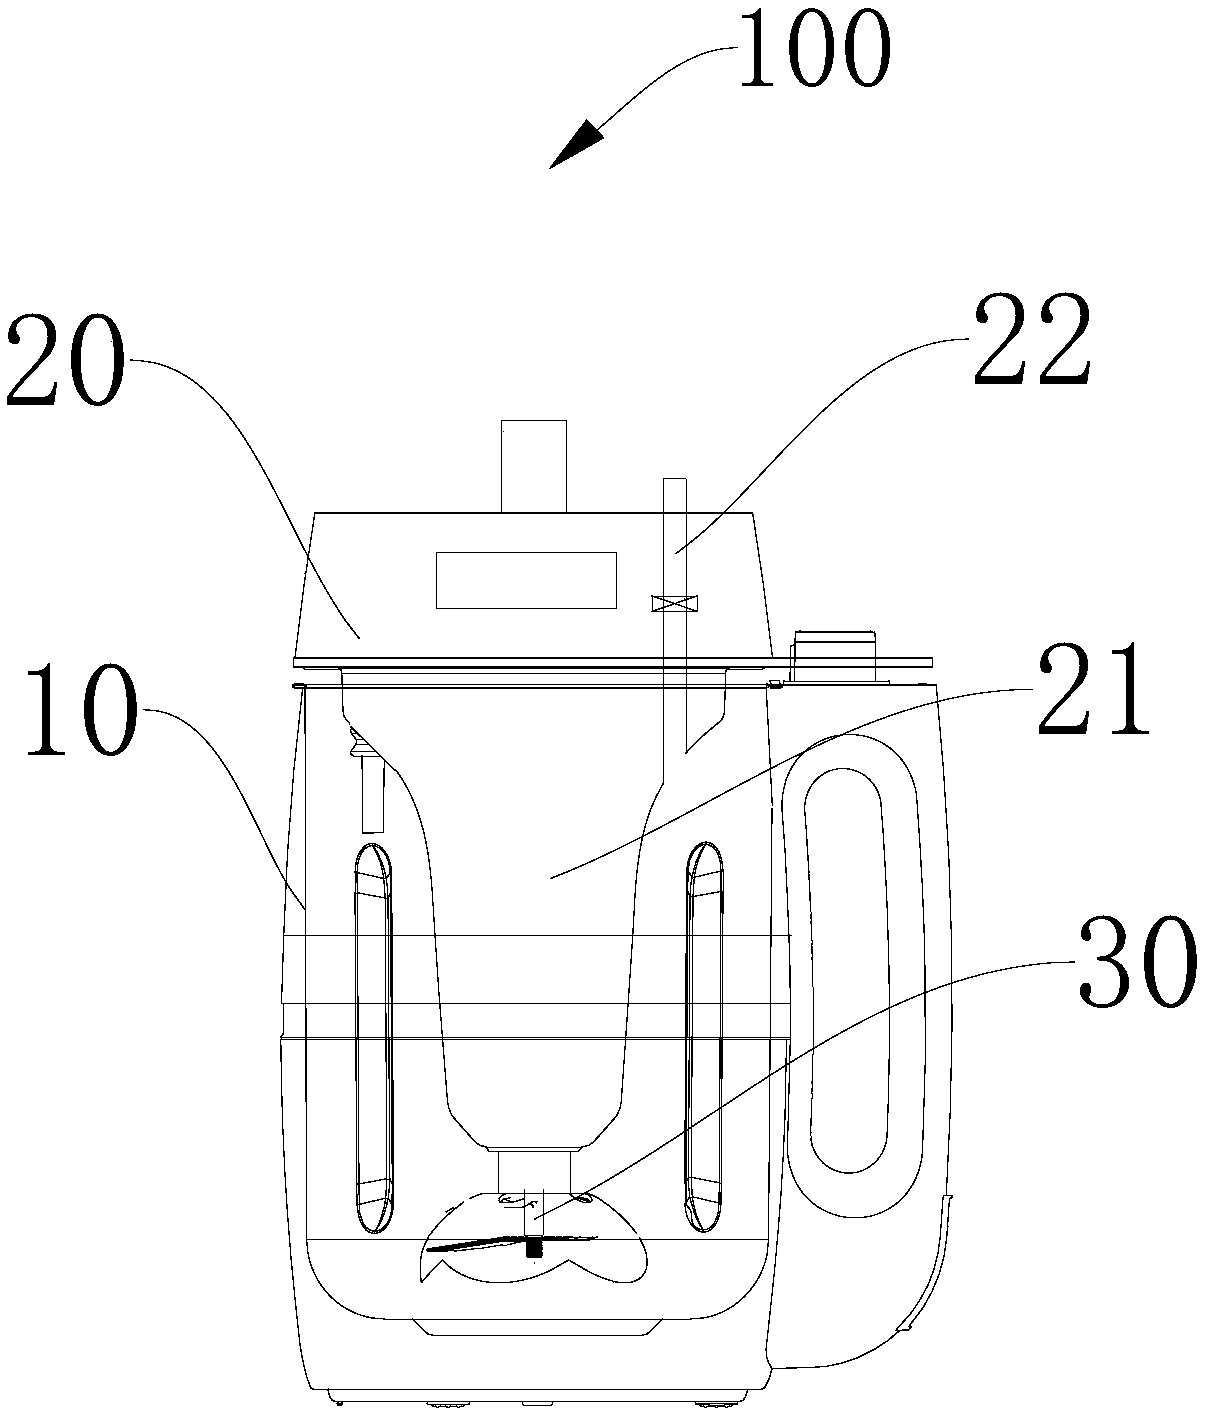 Pulping method for a food processor